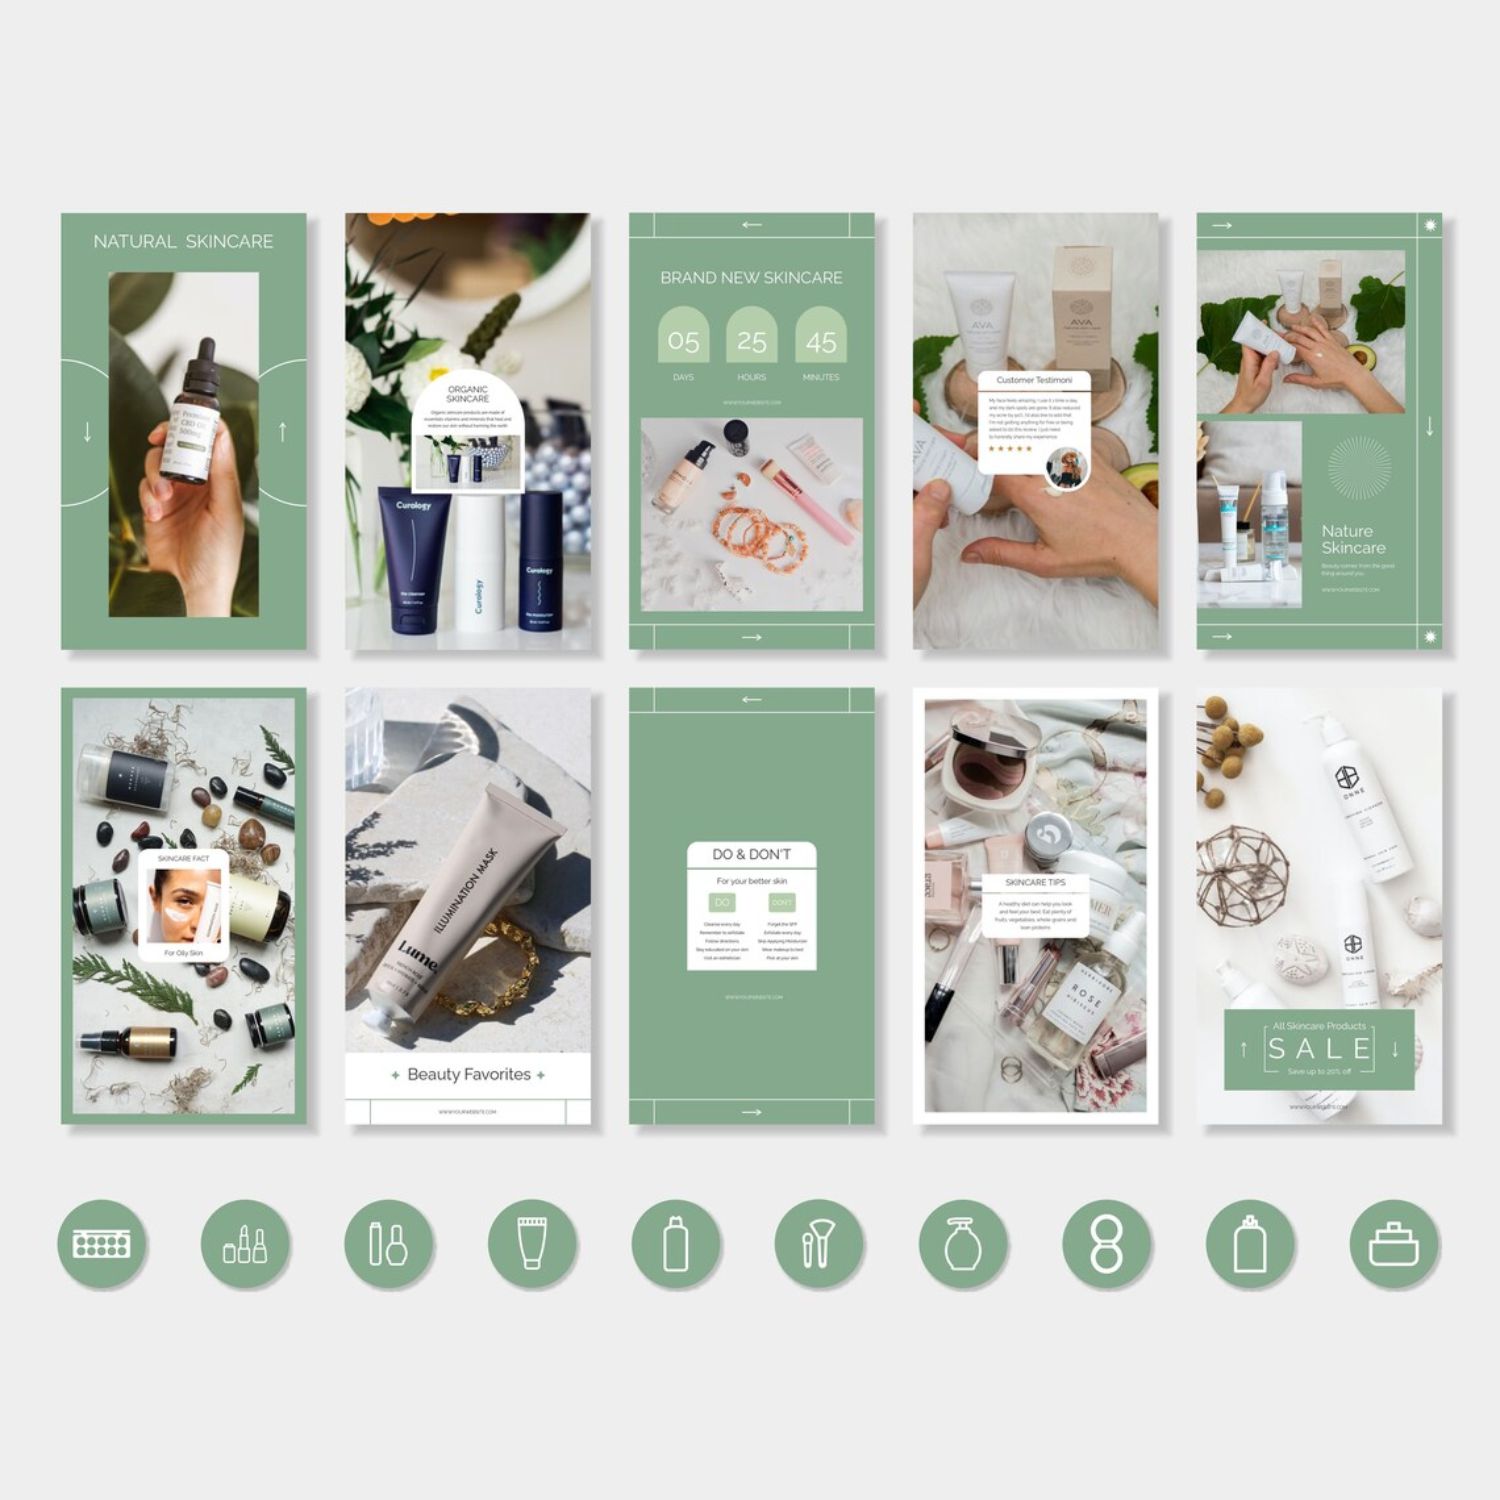 Natural Beauty And Skincare Instagram Marketing Templates Canva Photoshop Illustrator Examples.